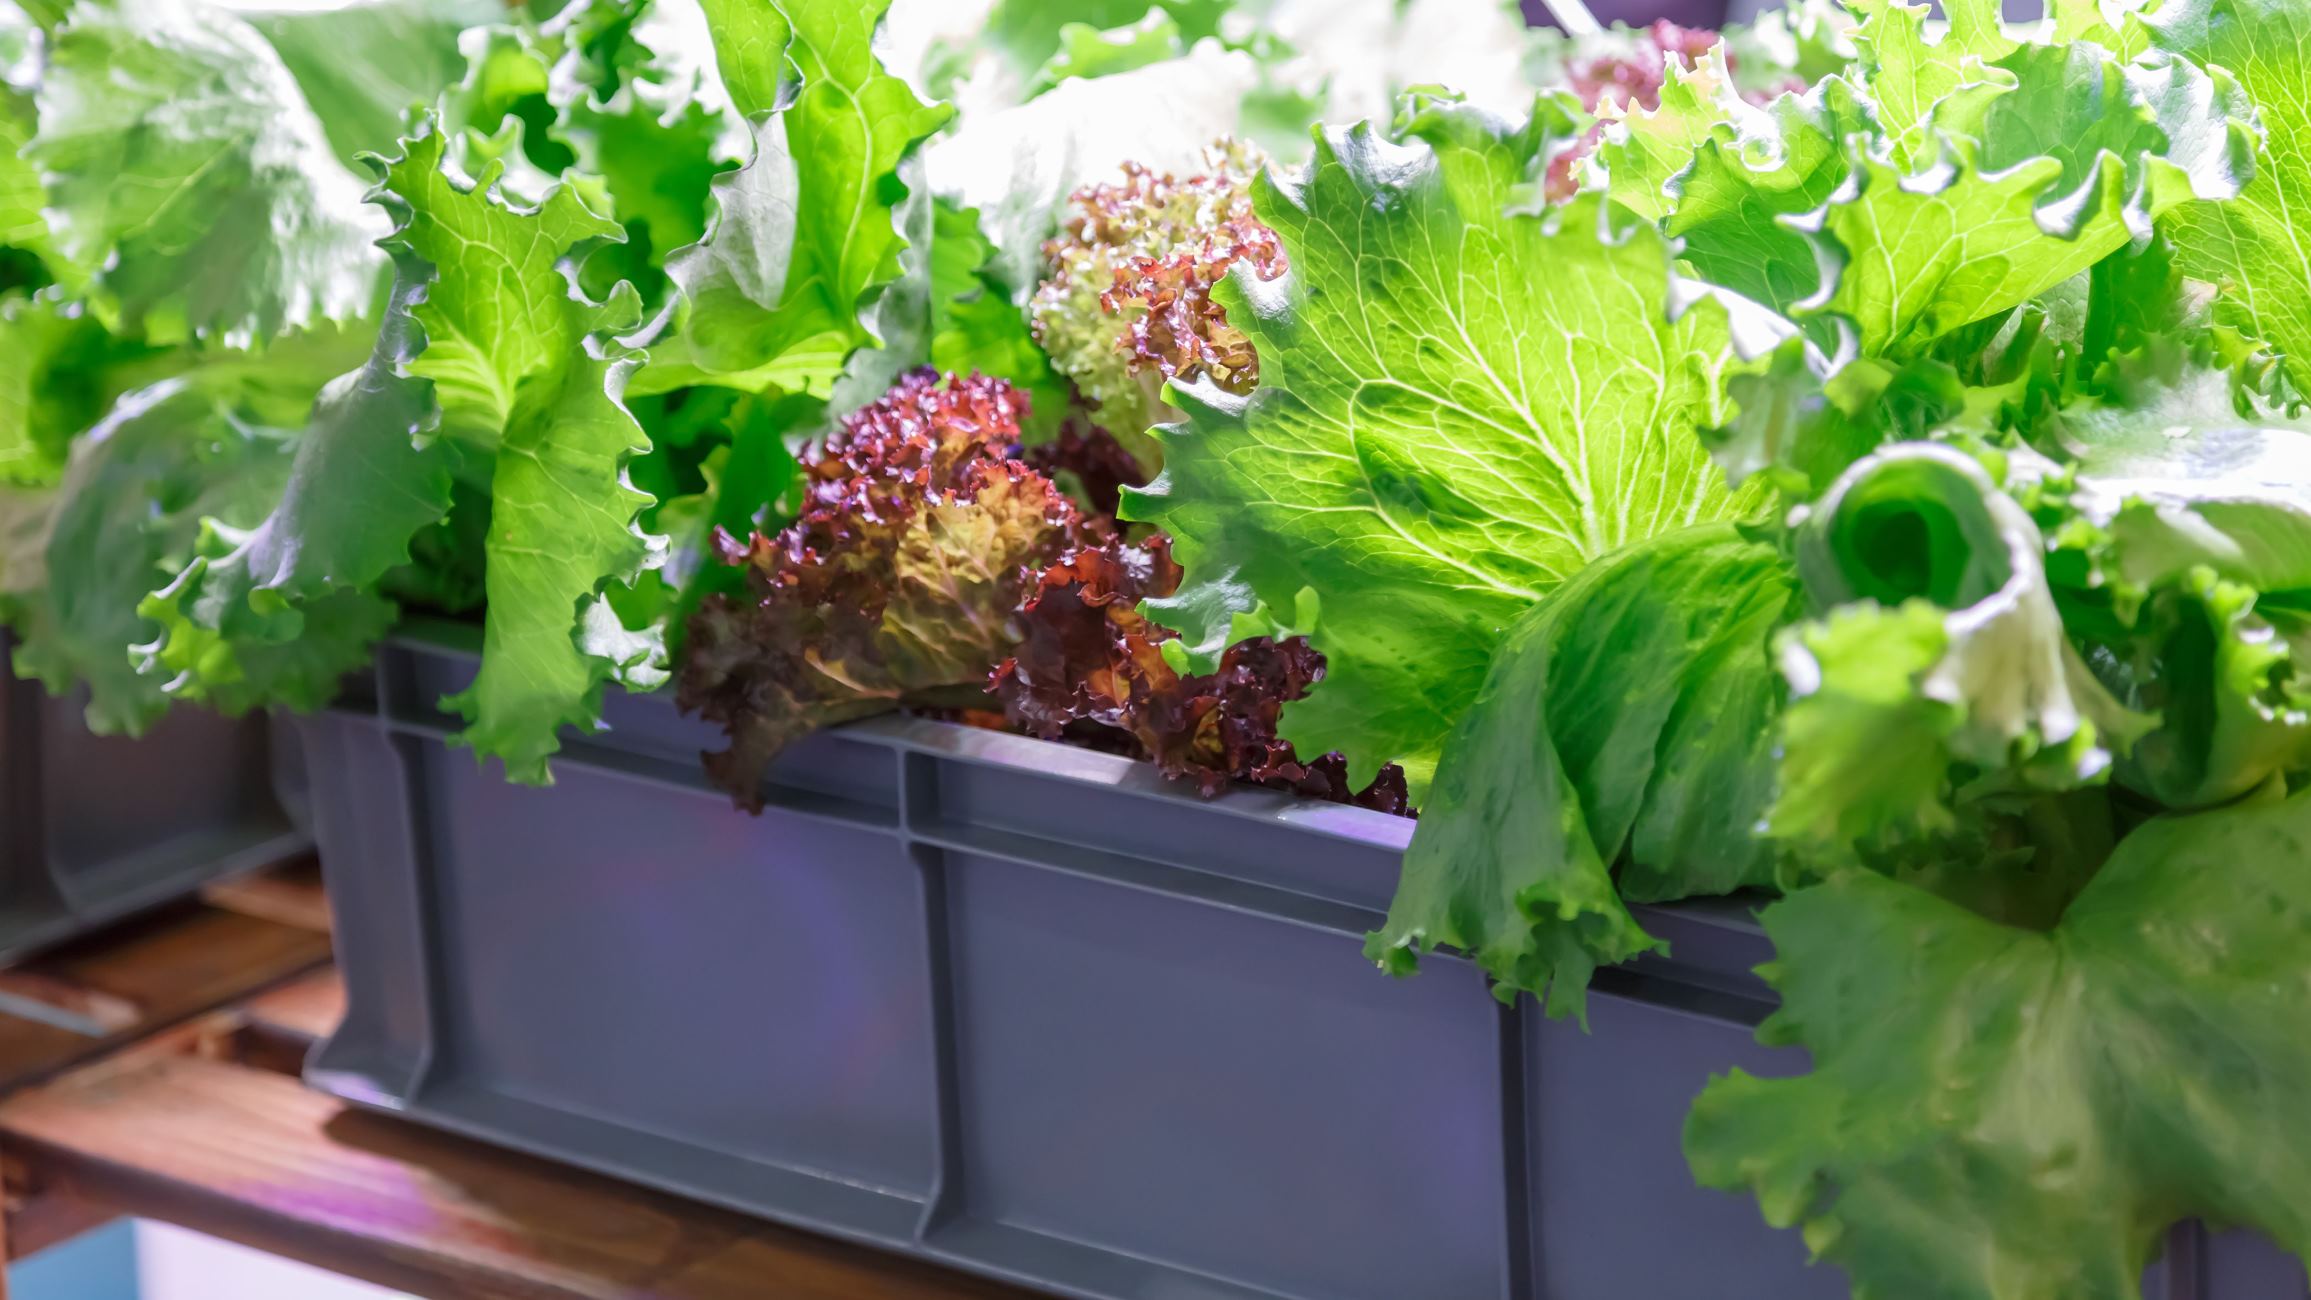 How To Grow Lettuce Indoors From Seeds